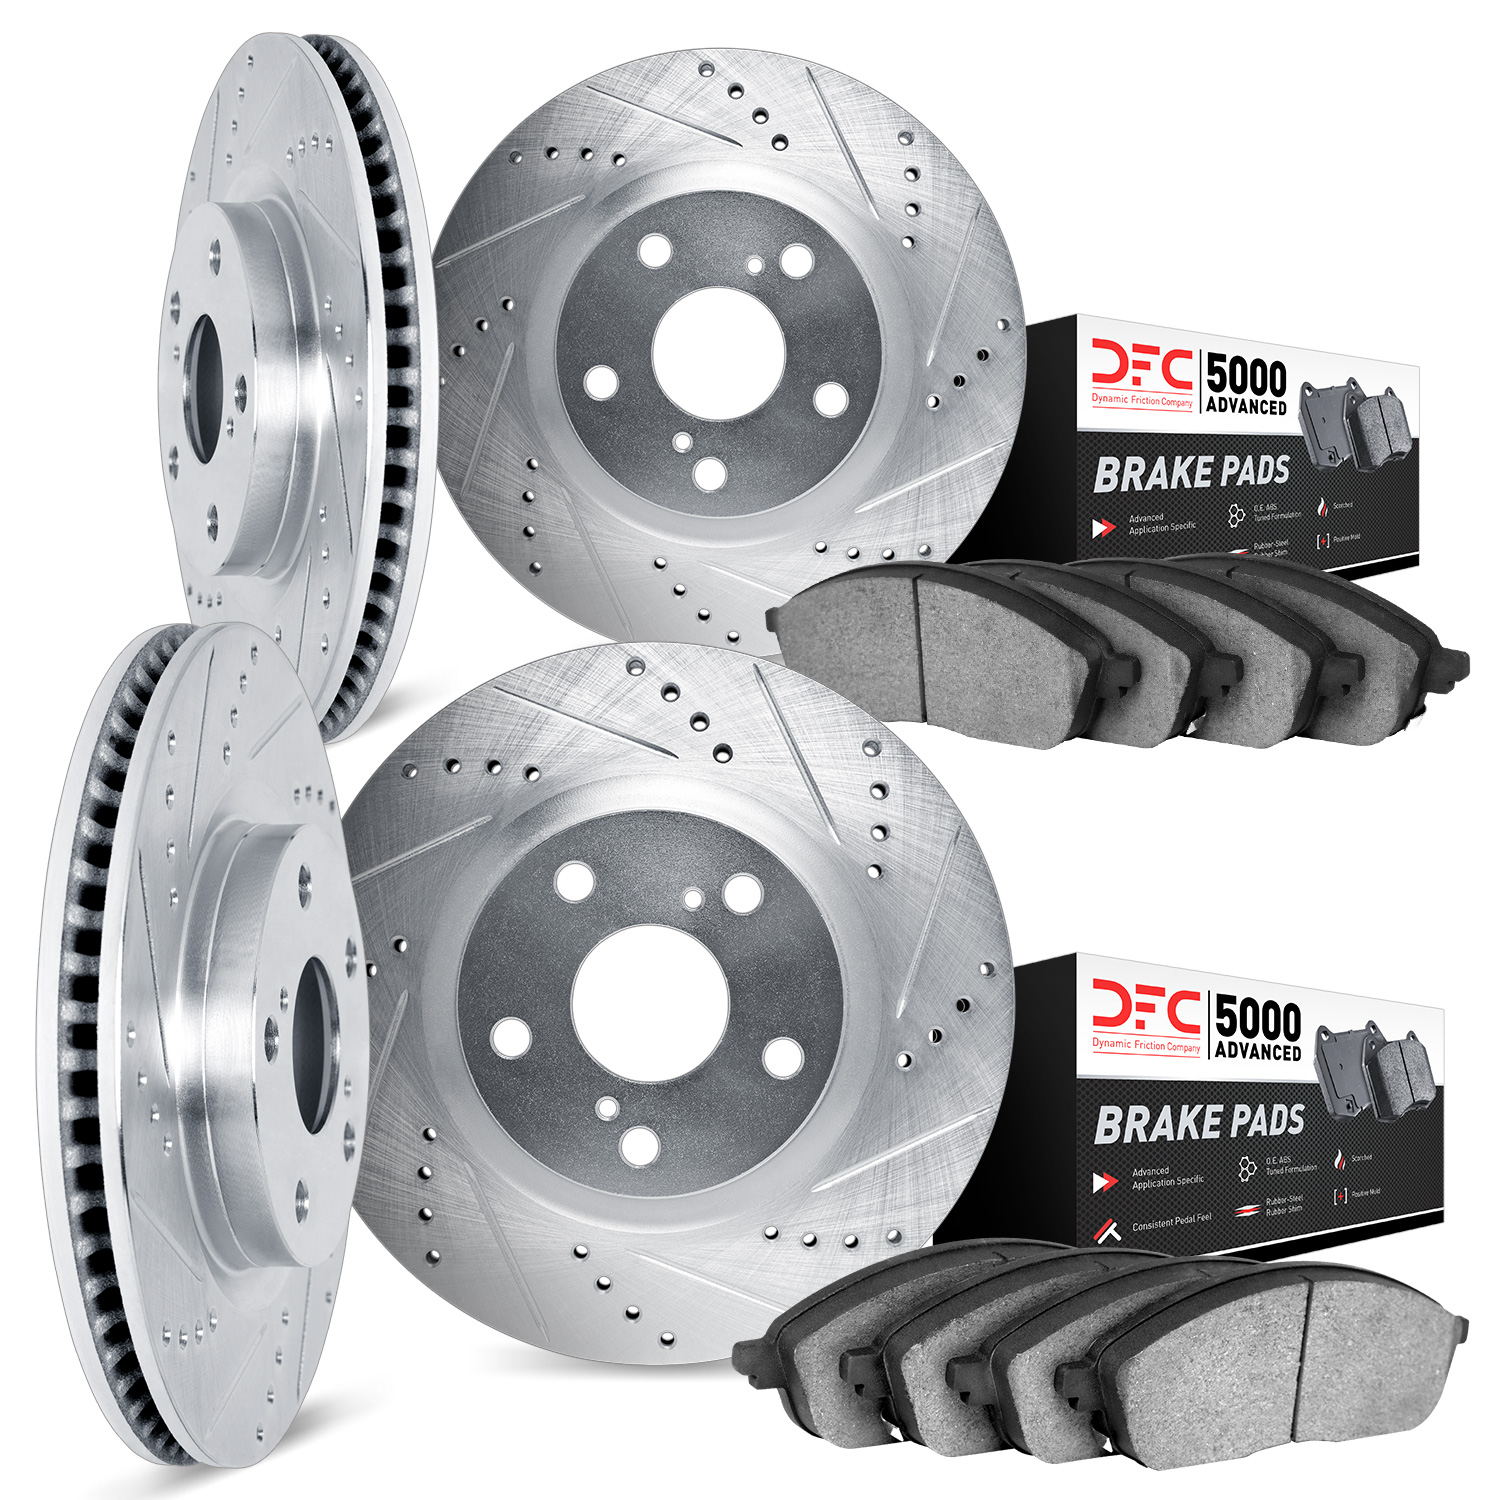 7504-13002 Drilled/Slotted Brake Rotors w/5000 Advanced Brake Pads Kit [Silver], 1990-1994 Subaru, Position: Front and Rear